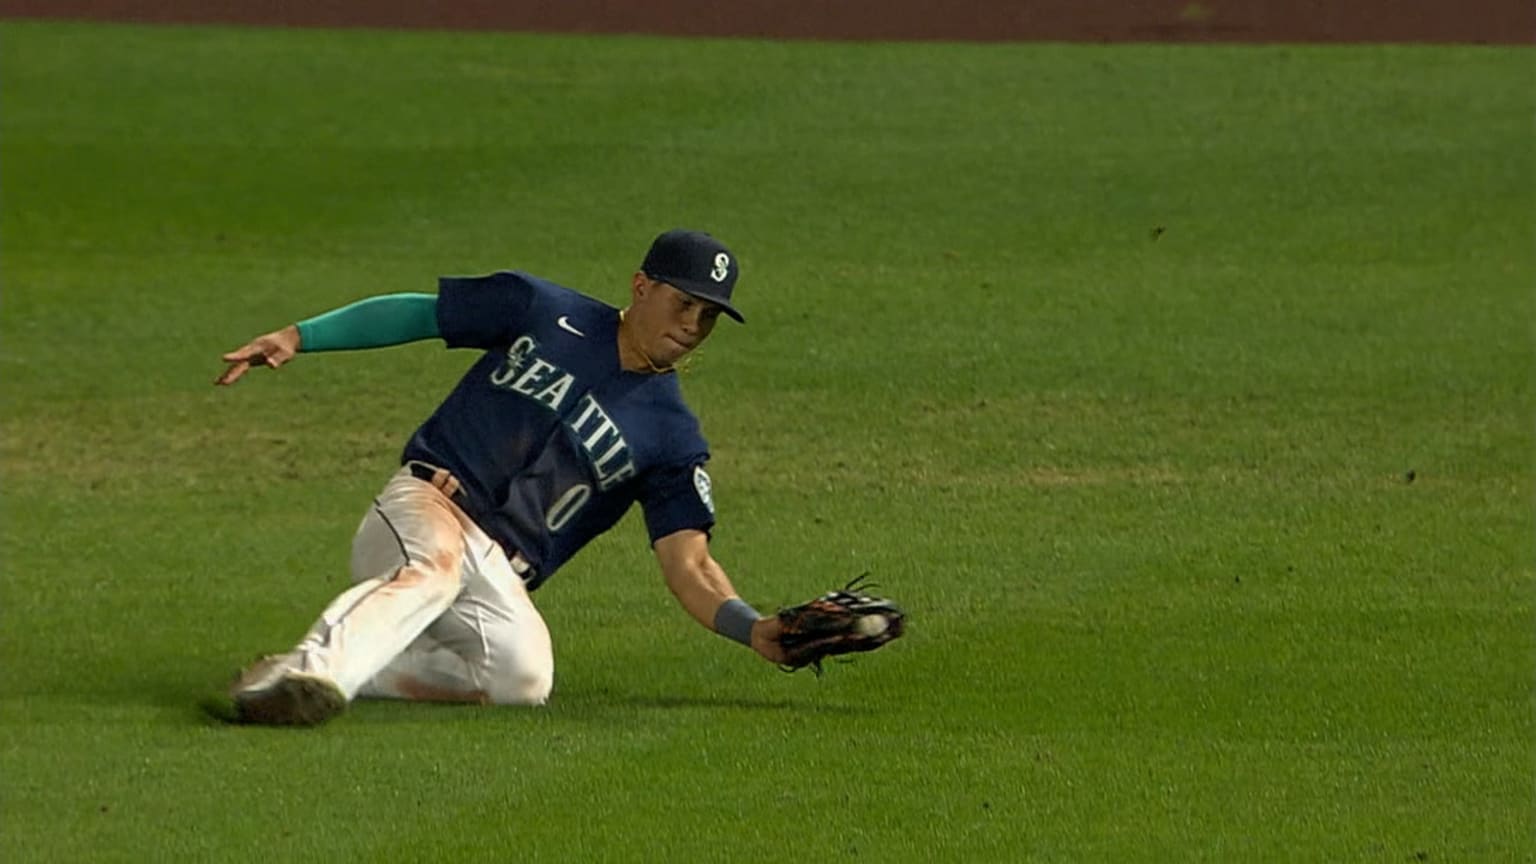 WATCH: Seattle Mariners outfielder Sam Haggerty makes one of the